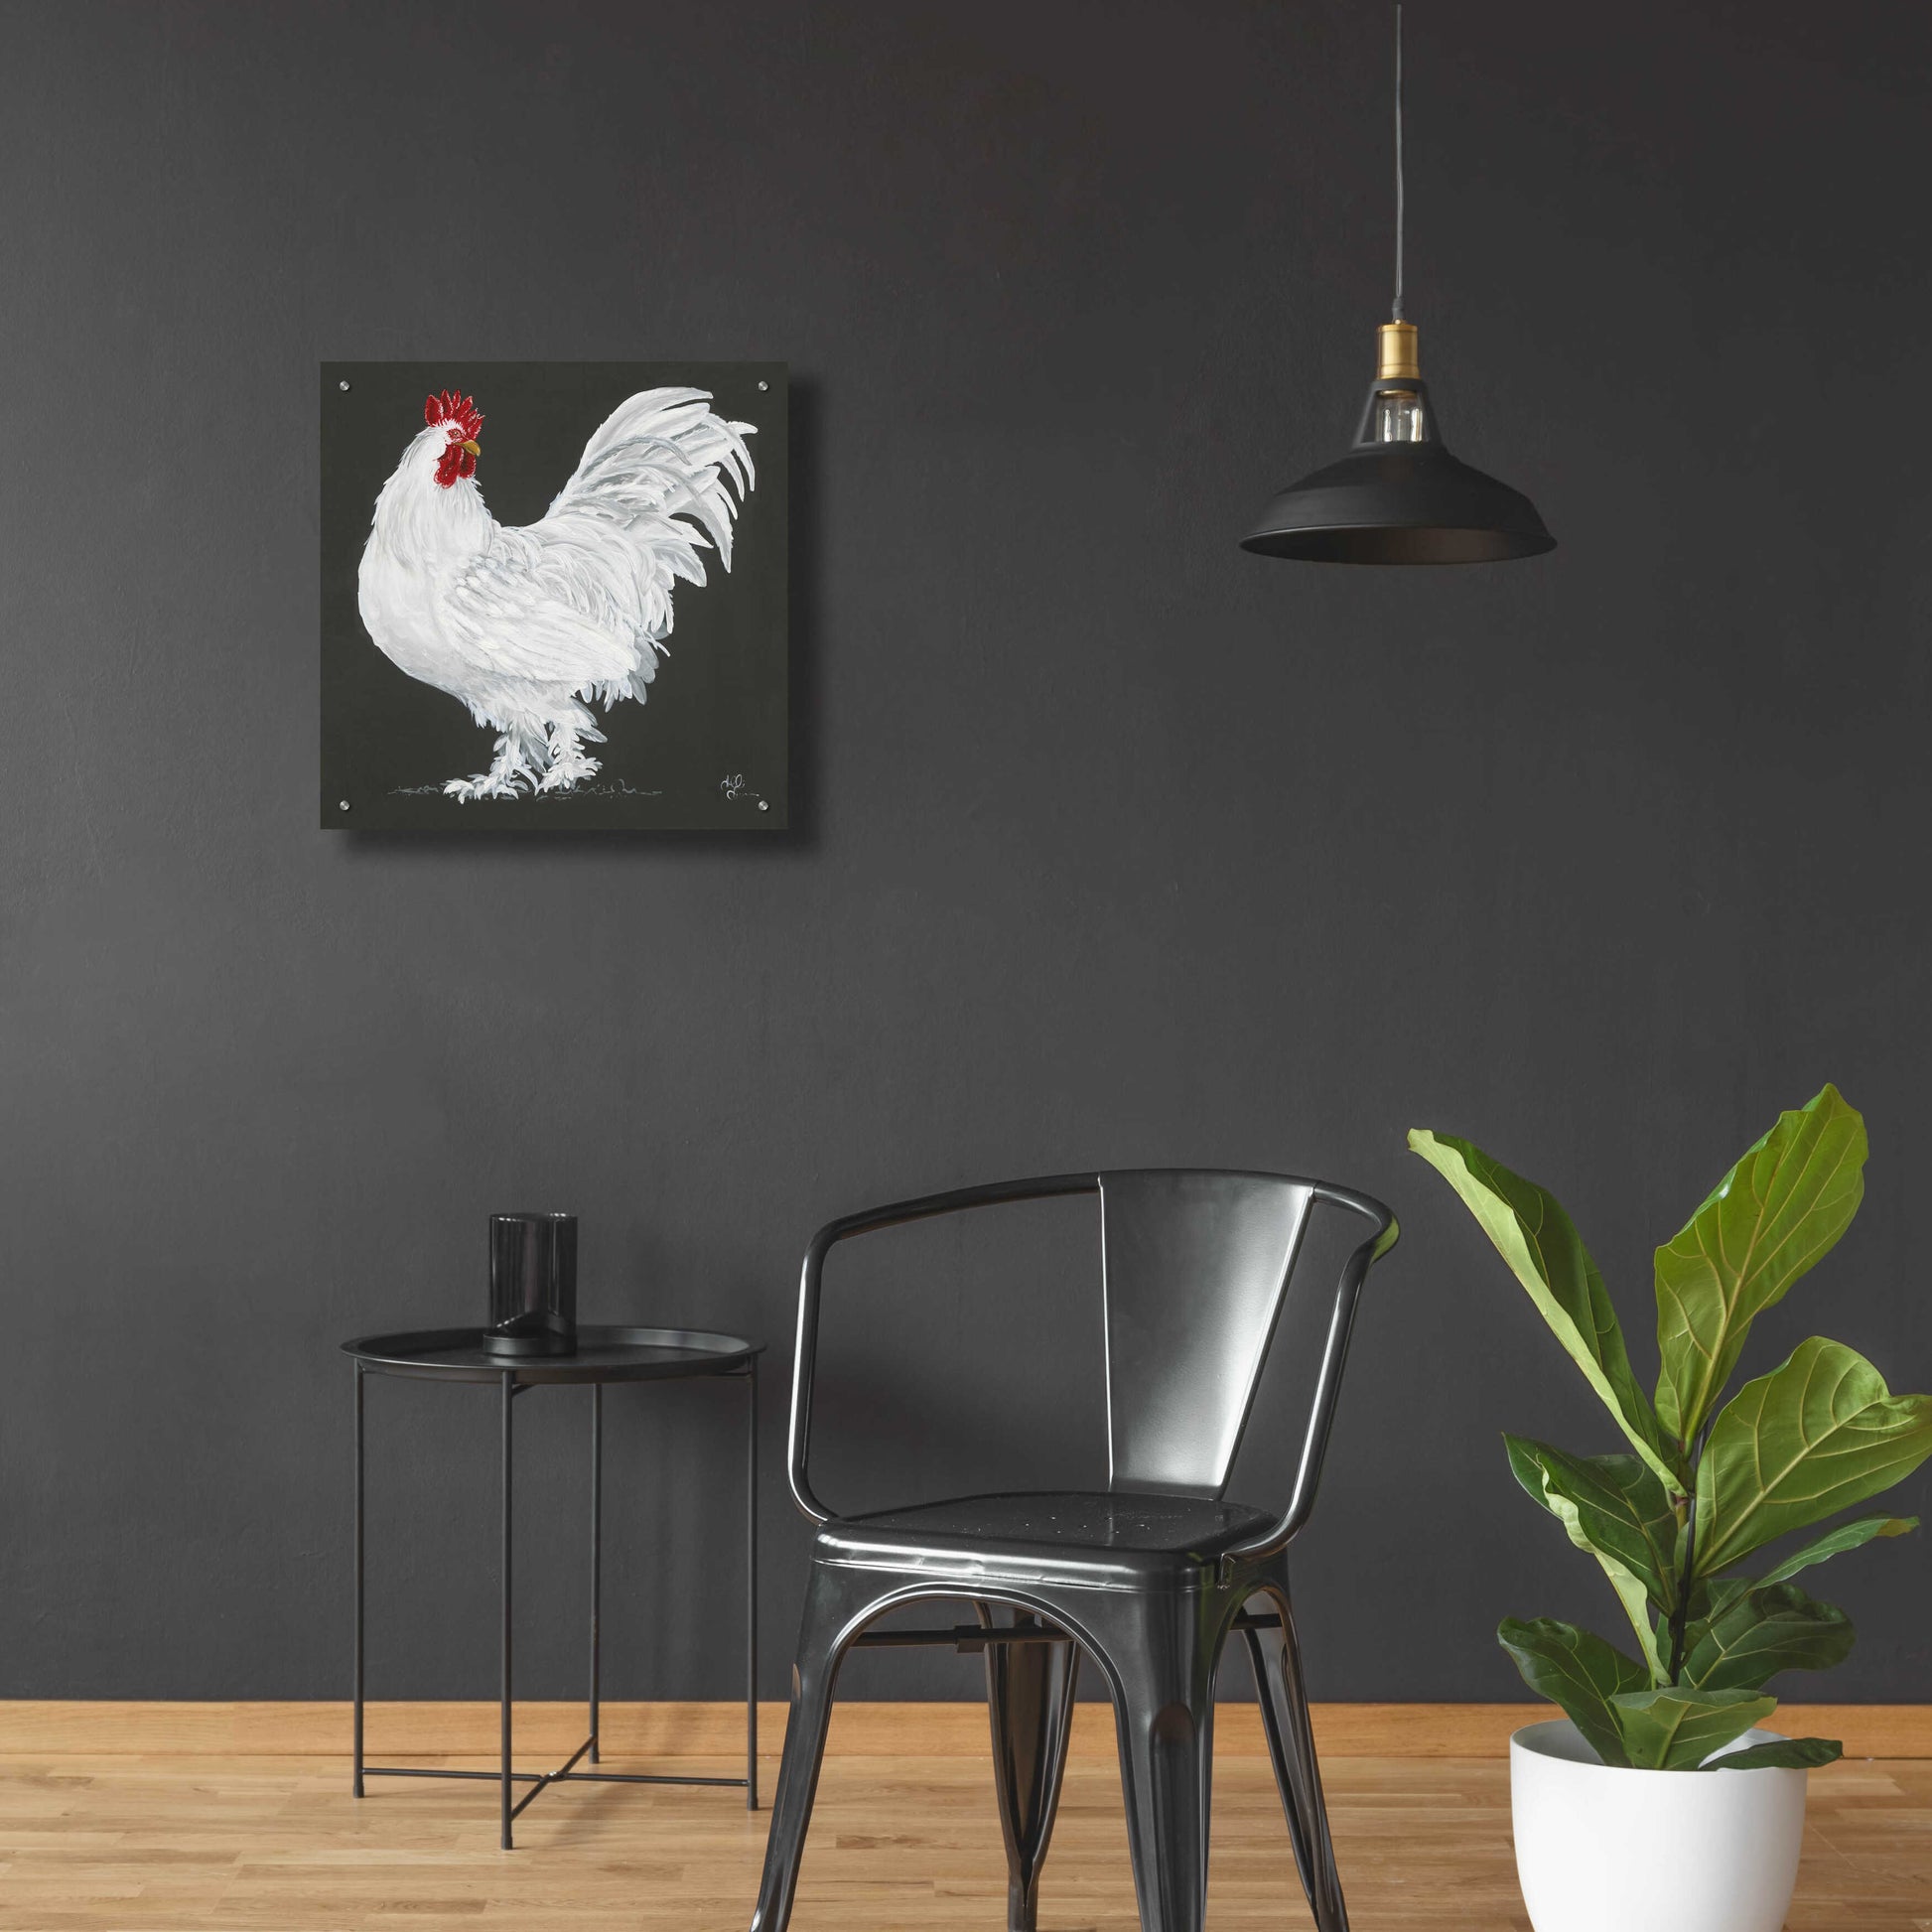 Epic Art 'Rooster' by Hollihocks Art, Acrylic Glass Wall Art,24x24